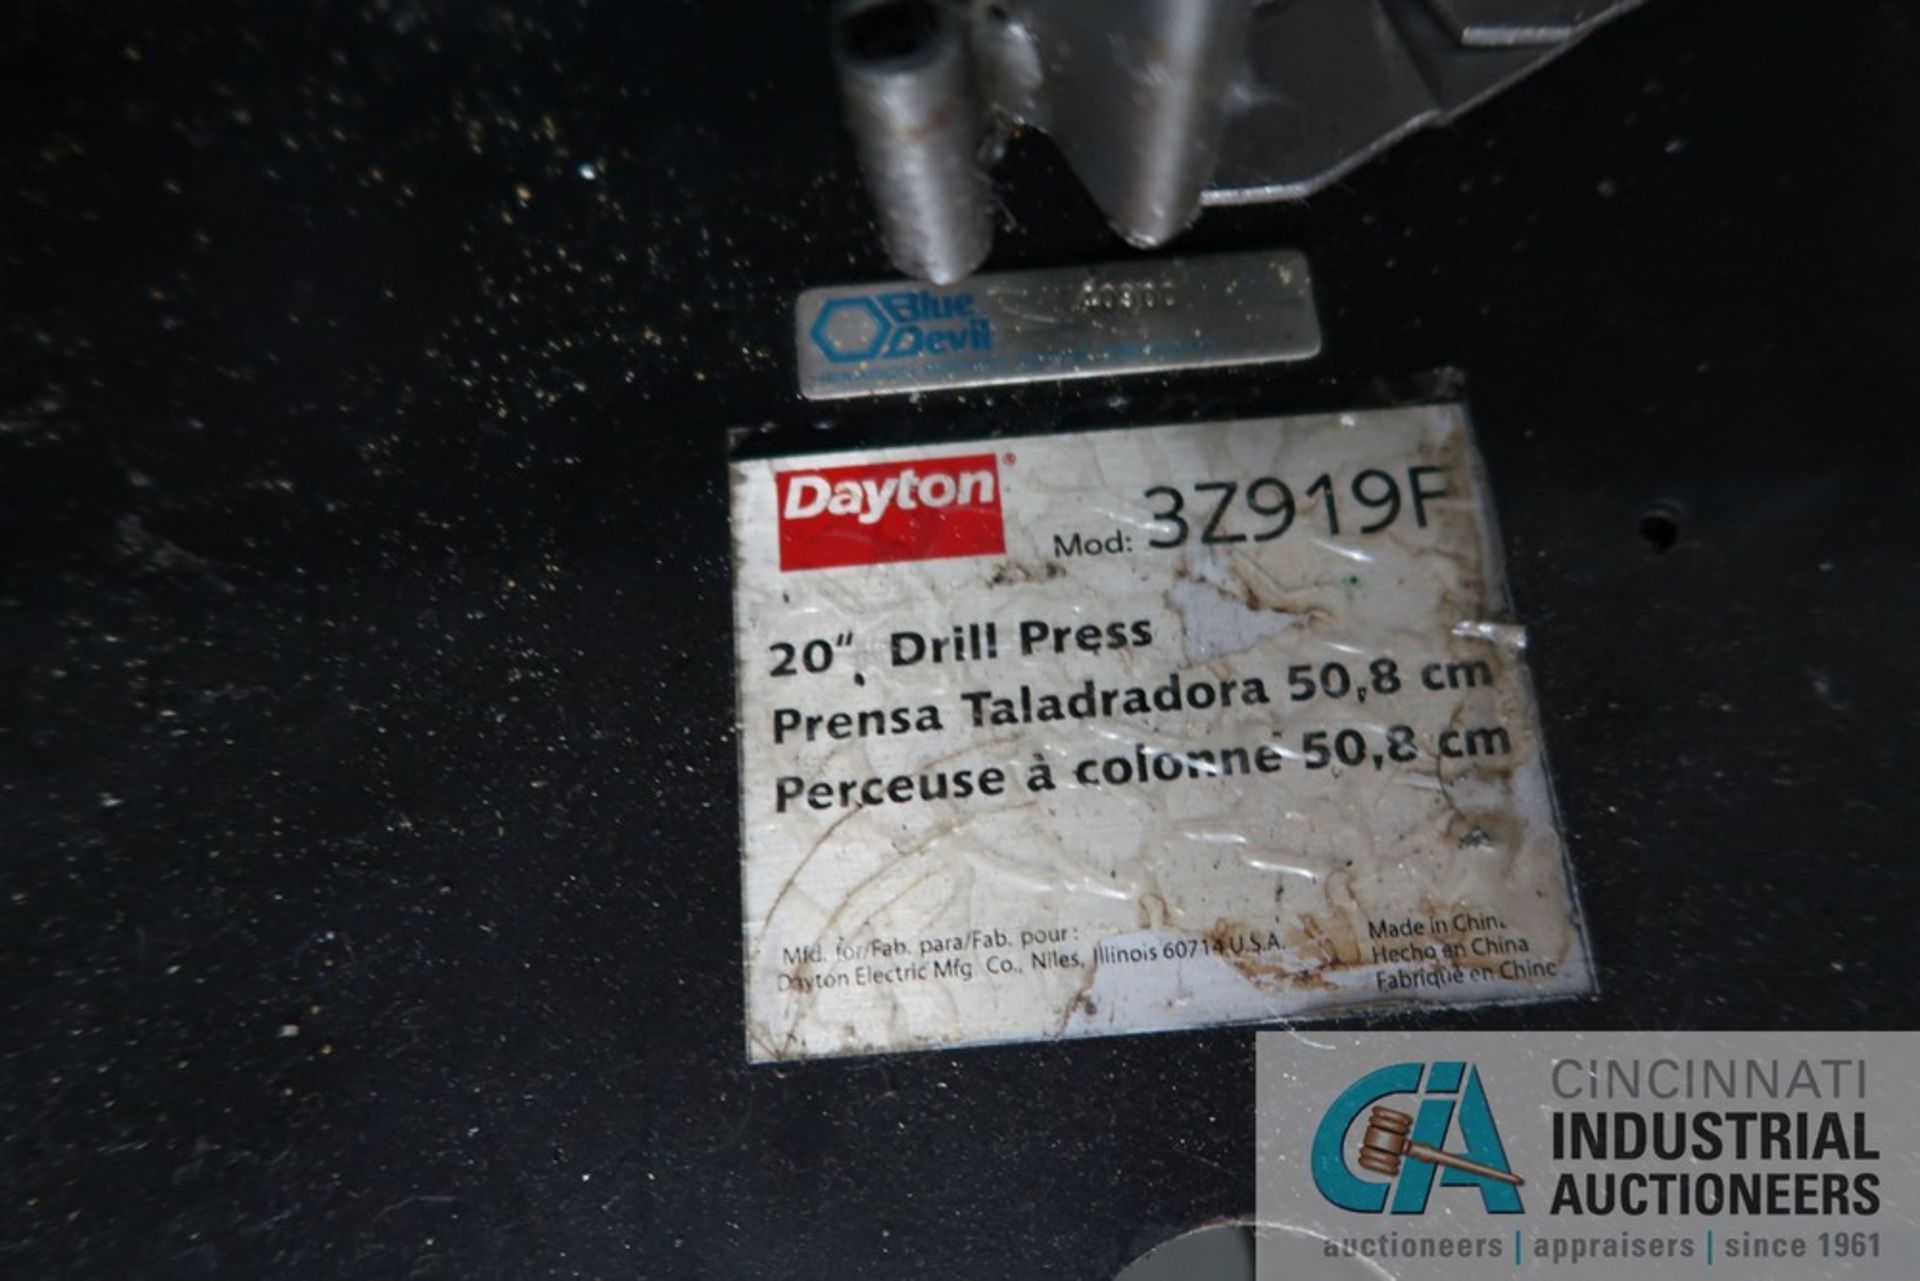 DAYTON MODEL 3Z919F DRILL PRESS, IN PIECES, BASE AND DRILL HEAD, METAL BELT CONVEYOR, COOLANT TANK - Image 3 of 5